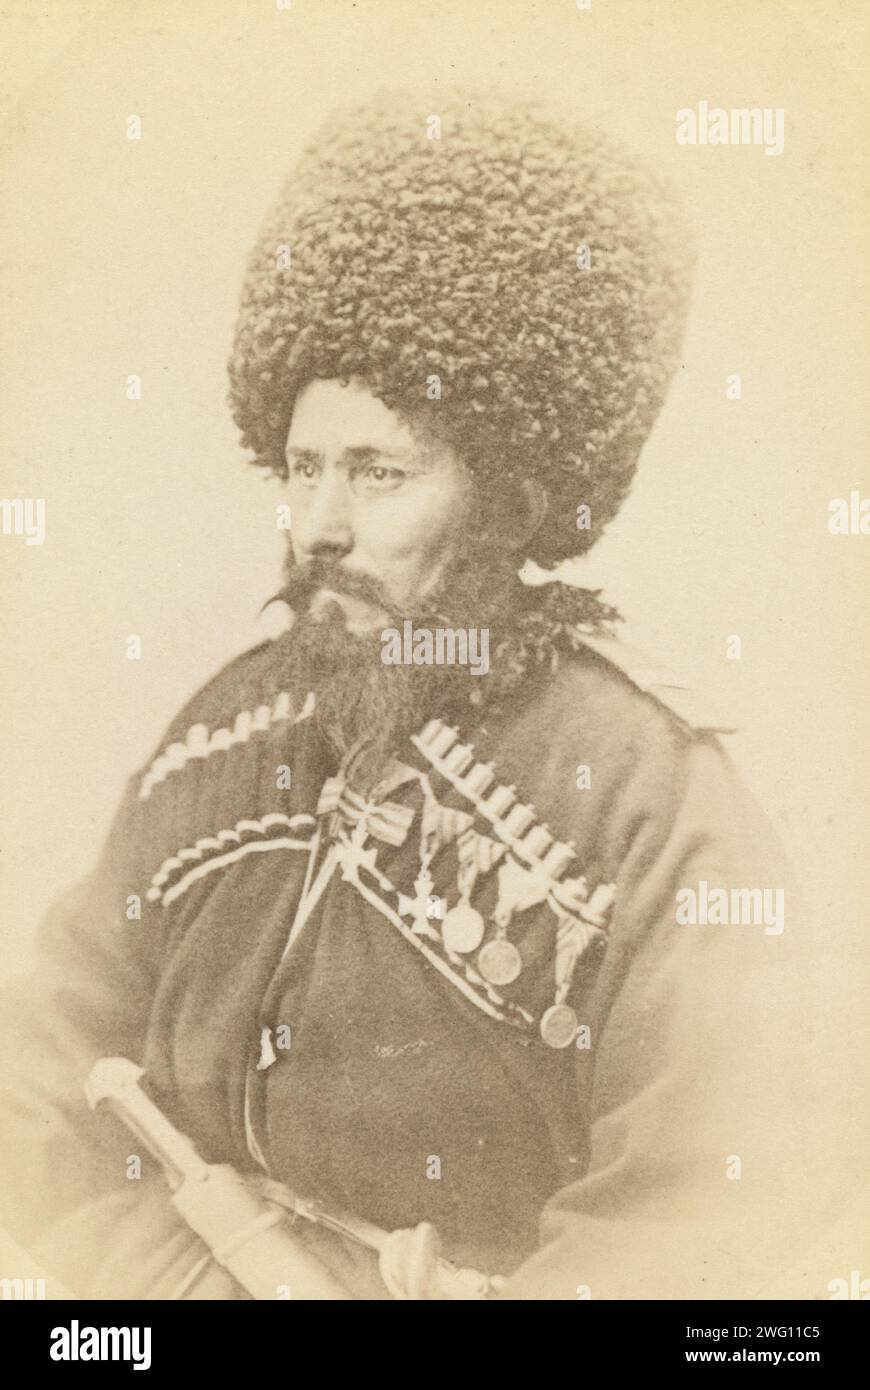 Half-length portrait of Daghestani man, facing left, between 1870 and 1886. Half-length portrait of a Daghestan mountaineer seated, facing left. Inscribed on verso: Daghestan mountaineer. Stock Photo